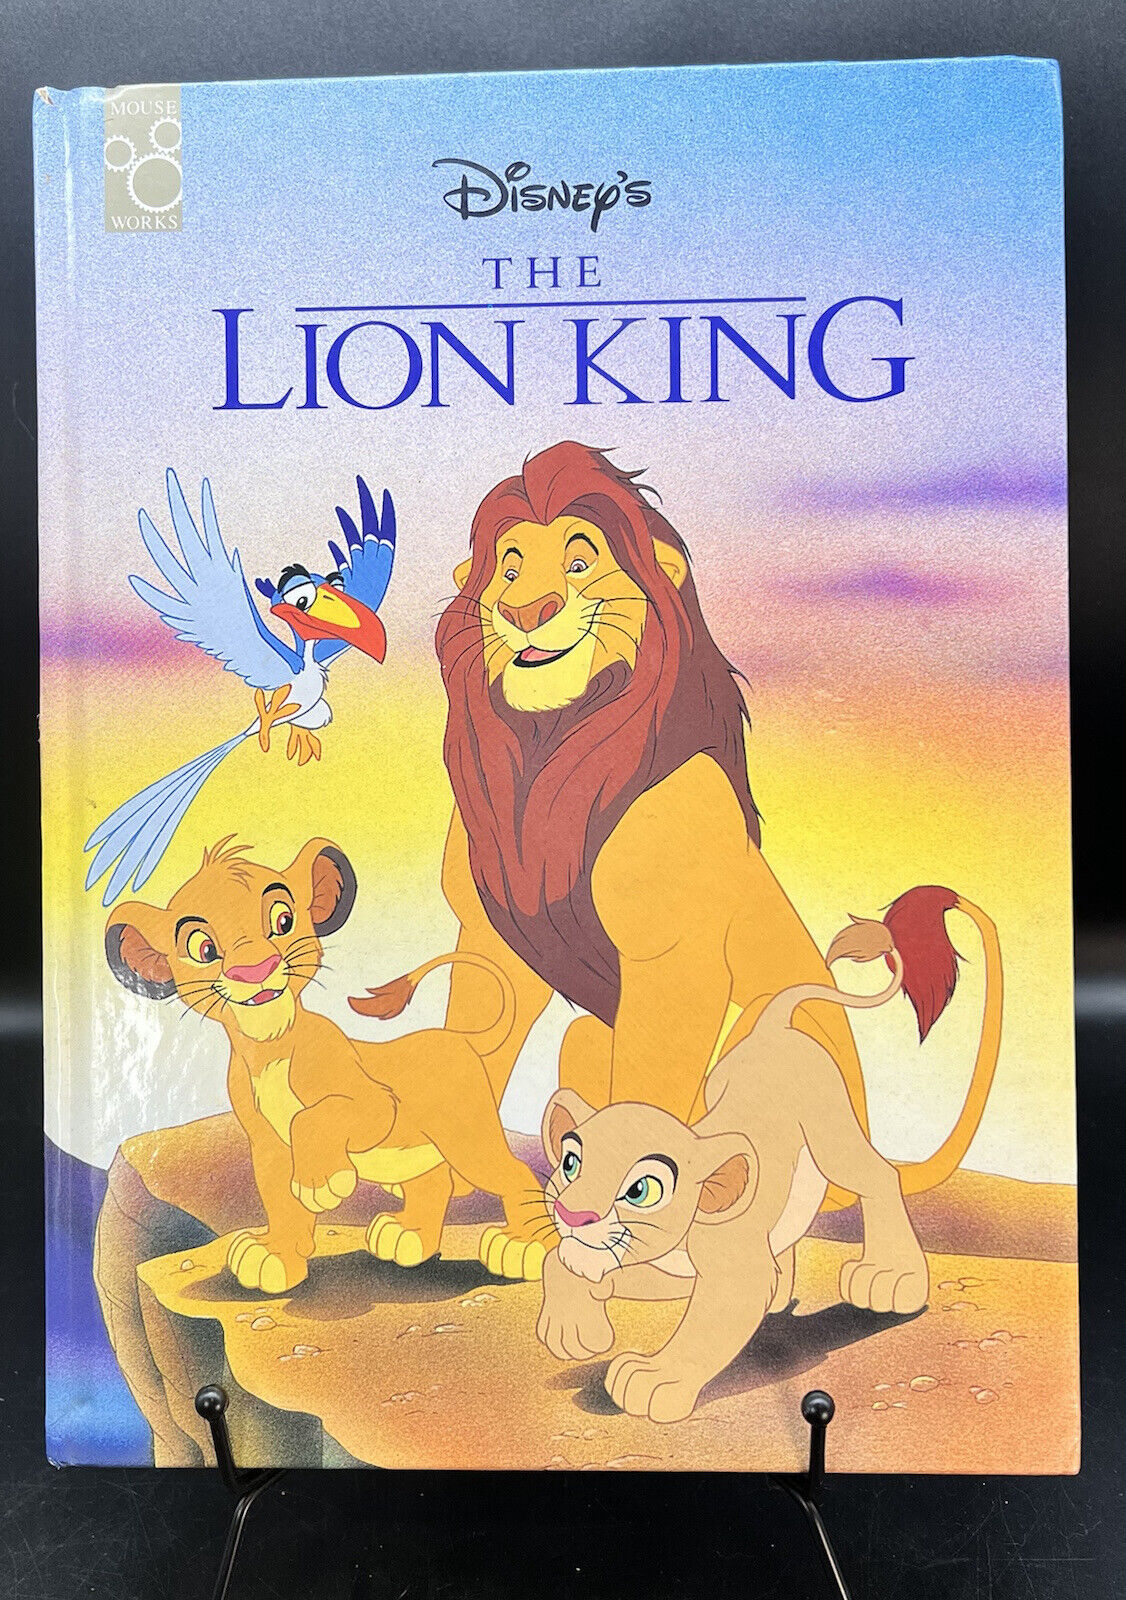 Disney\'s The Lion King Mouse Works Disney Classic Series Hardcover Book 1994 Vtg